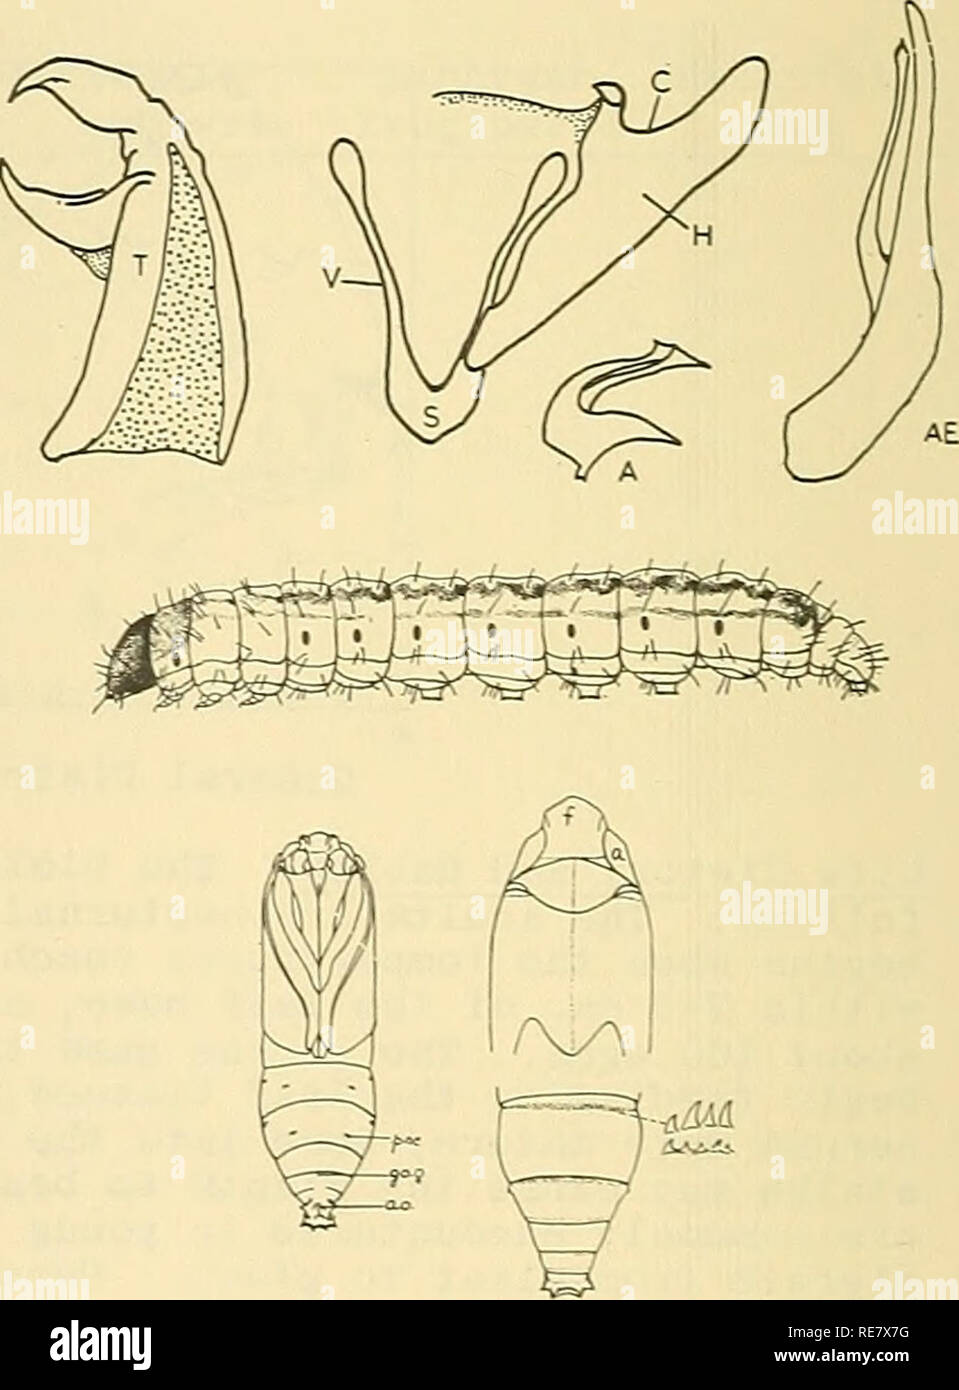 . Cooperative economic insect report. Beneficial insects; Insect pests. Figures: Left, male and female of C. zonellus; upper right, male genitalia of C. zonellus; right center, larva of cEilo sp.; lower right, ventral and dorsal views of C. zonellus. Major references and figures (except map): Larva of Chilo sp. from Fletcher, T. B. (Editor). 1919. Report of Proceedings of Third Entomological Meeting, Pusa, India, Feb. 3-15, 417 pp. Pupal characters of C. zonellus from Isaac, P.V. and Venkatraman, T.V. 1941. Indian Jour. Agr. Sci. 11(5):804-815. Male genitalia from Jepson, W.F. 1954. A Critical Stock Photo